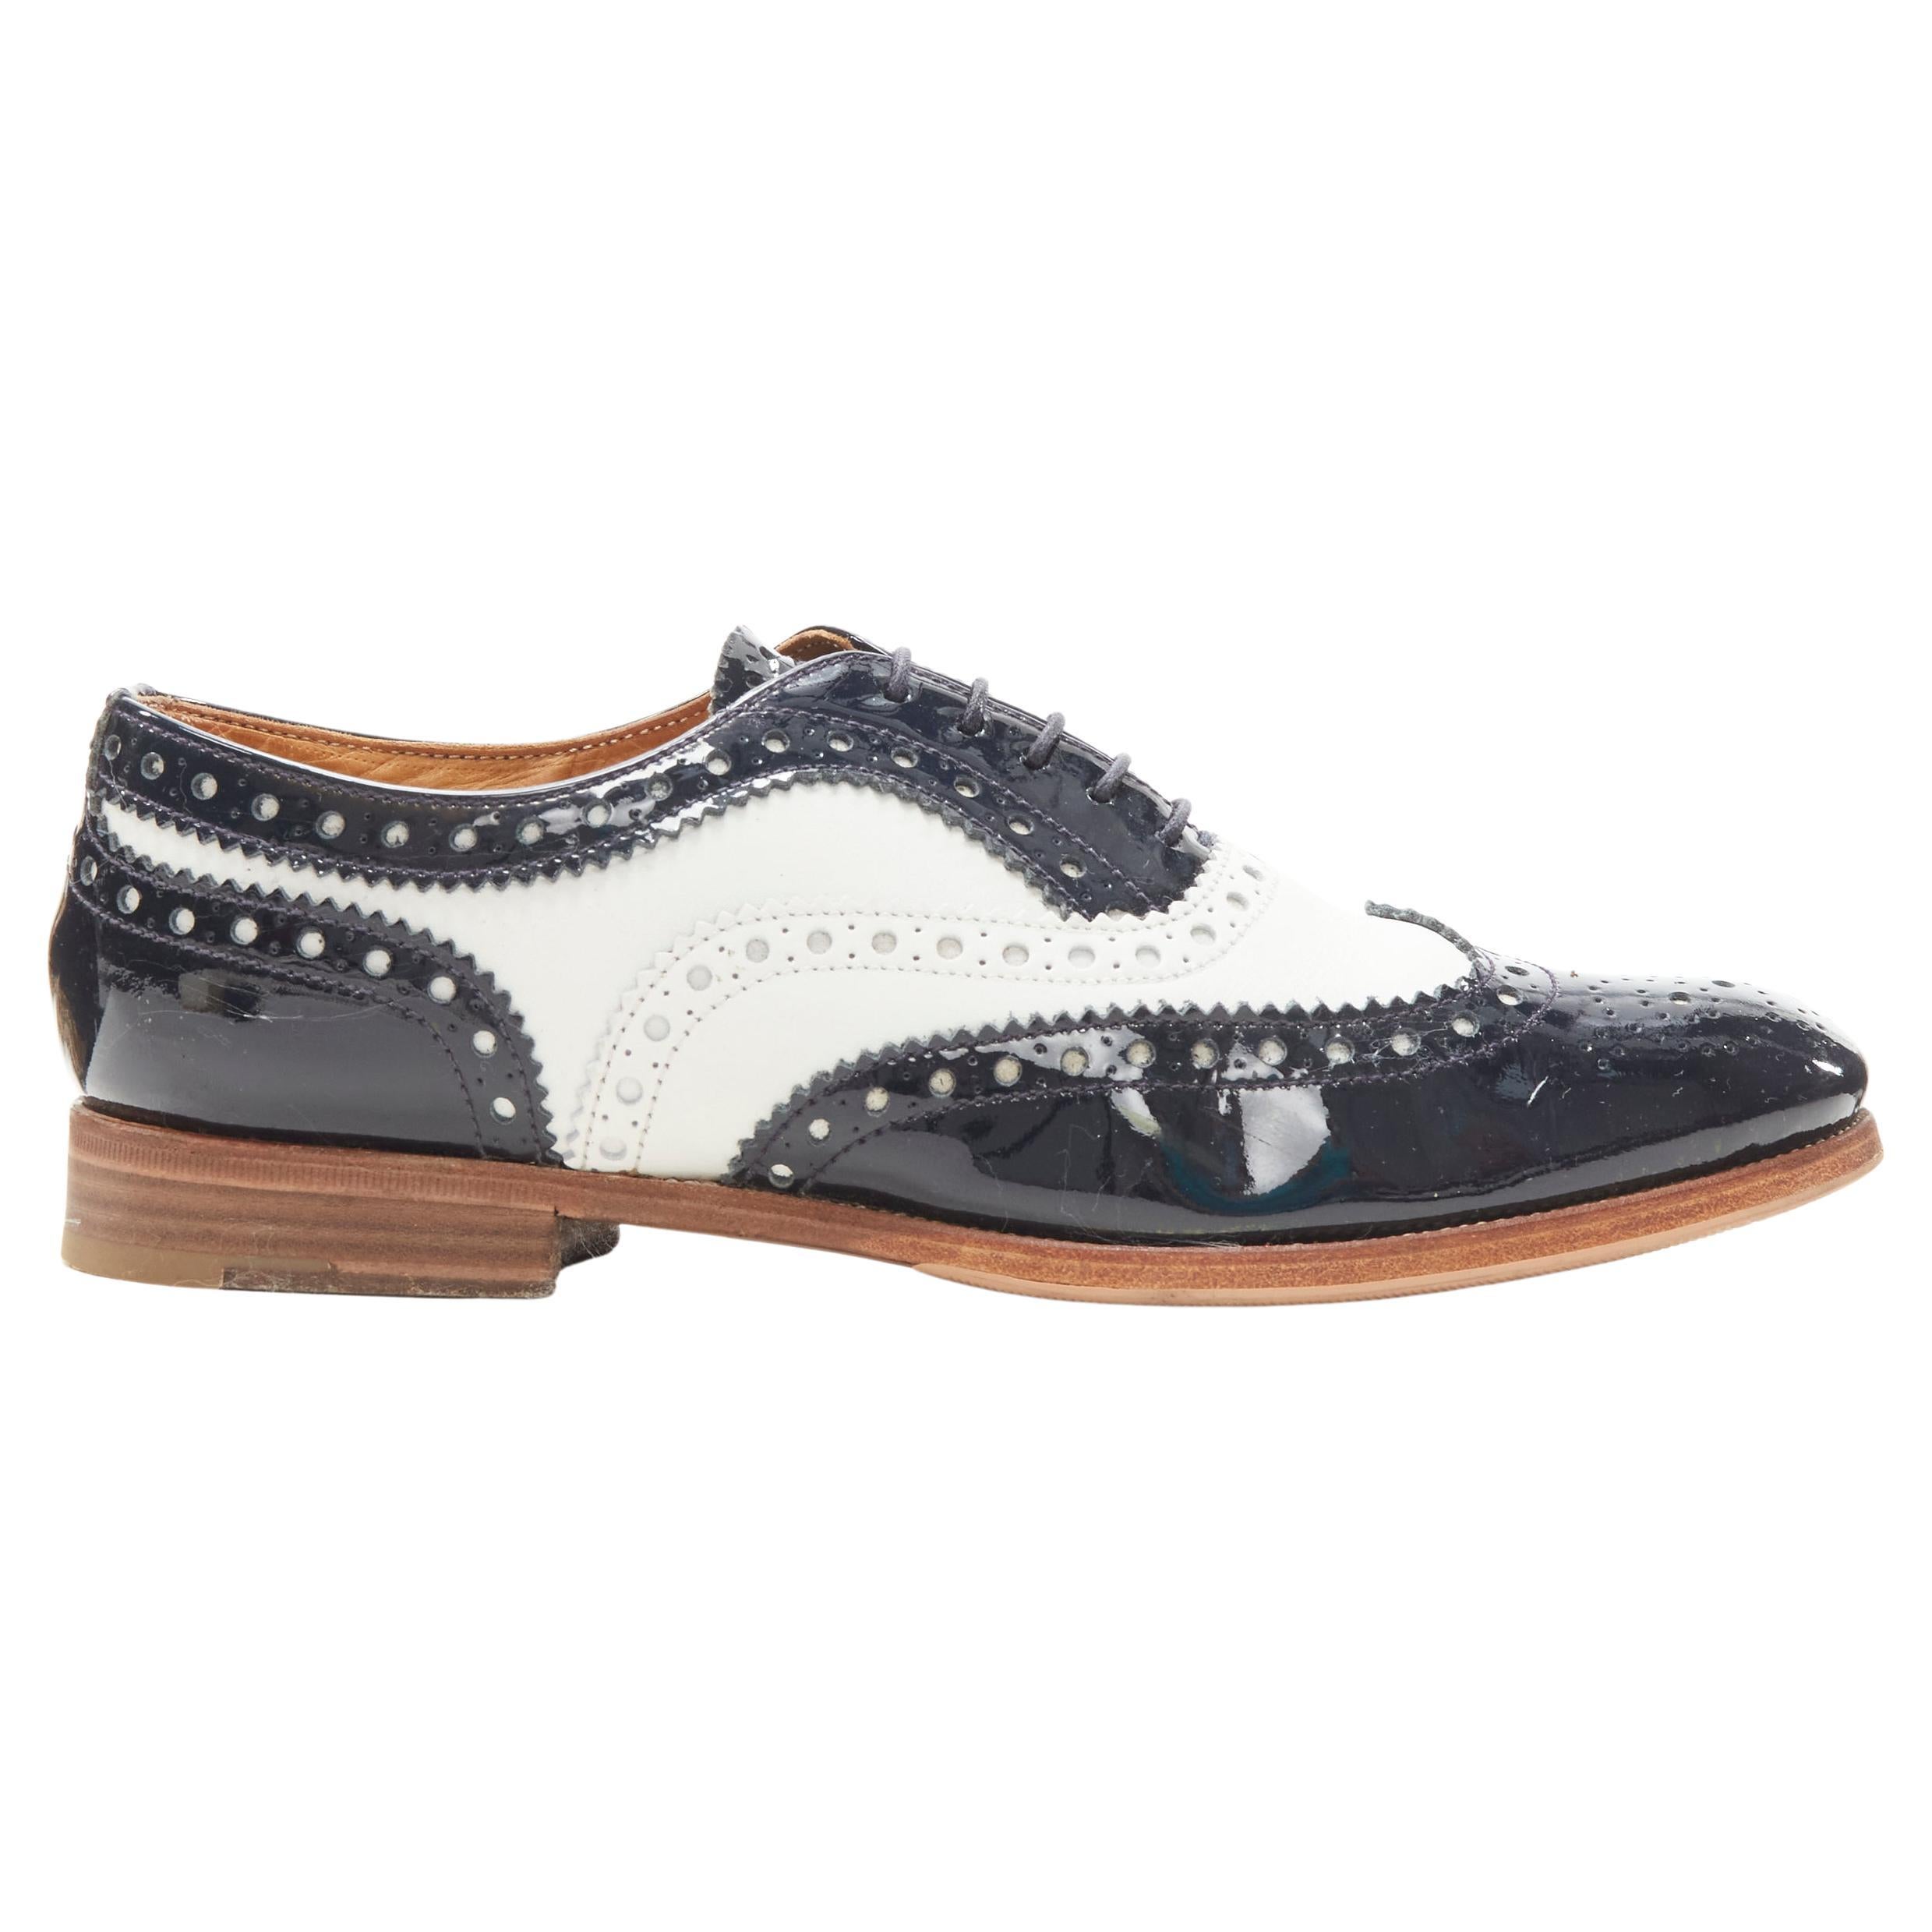 CHURCH'S Burwood black patent white perforated leather brogue EU36 For Sale